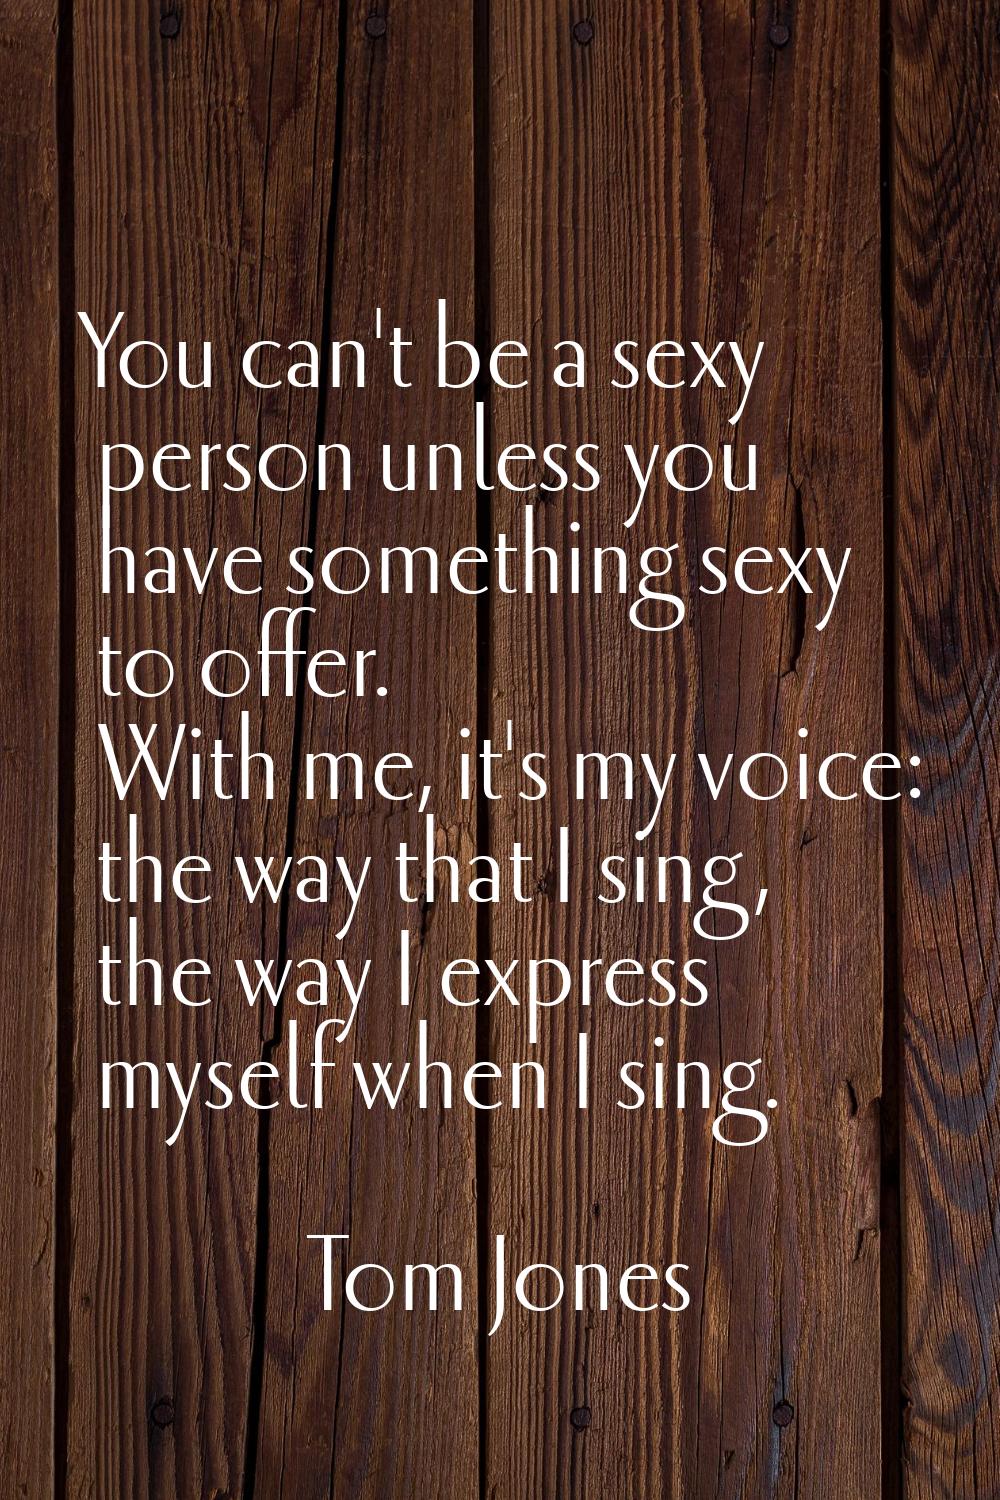 You can't be a sexy person unless you have something sexy to offer. With me, it's my voice: the way